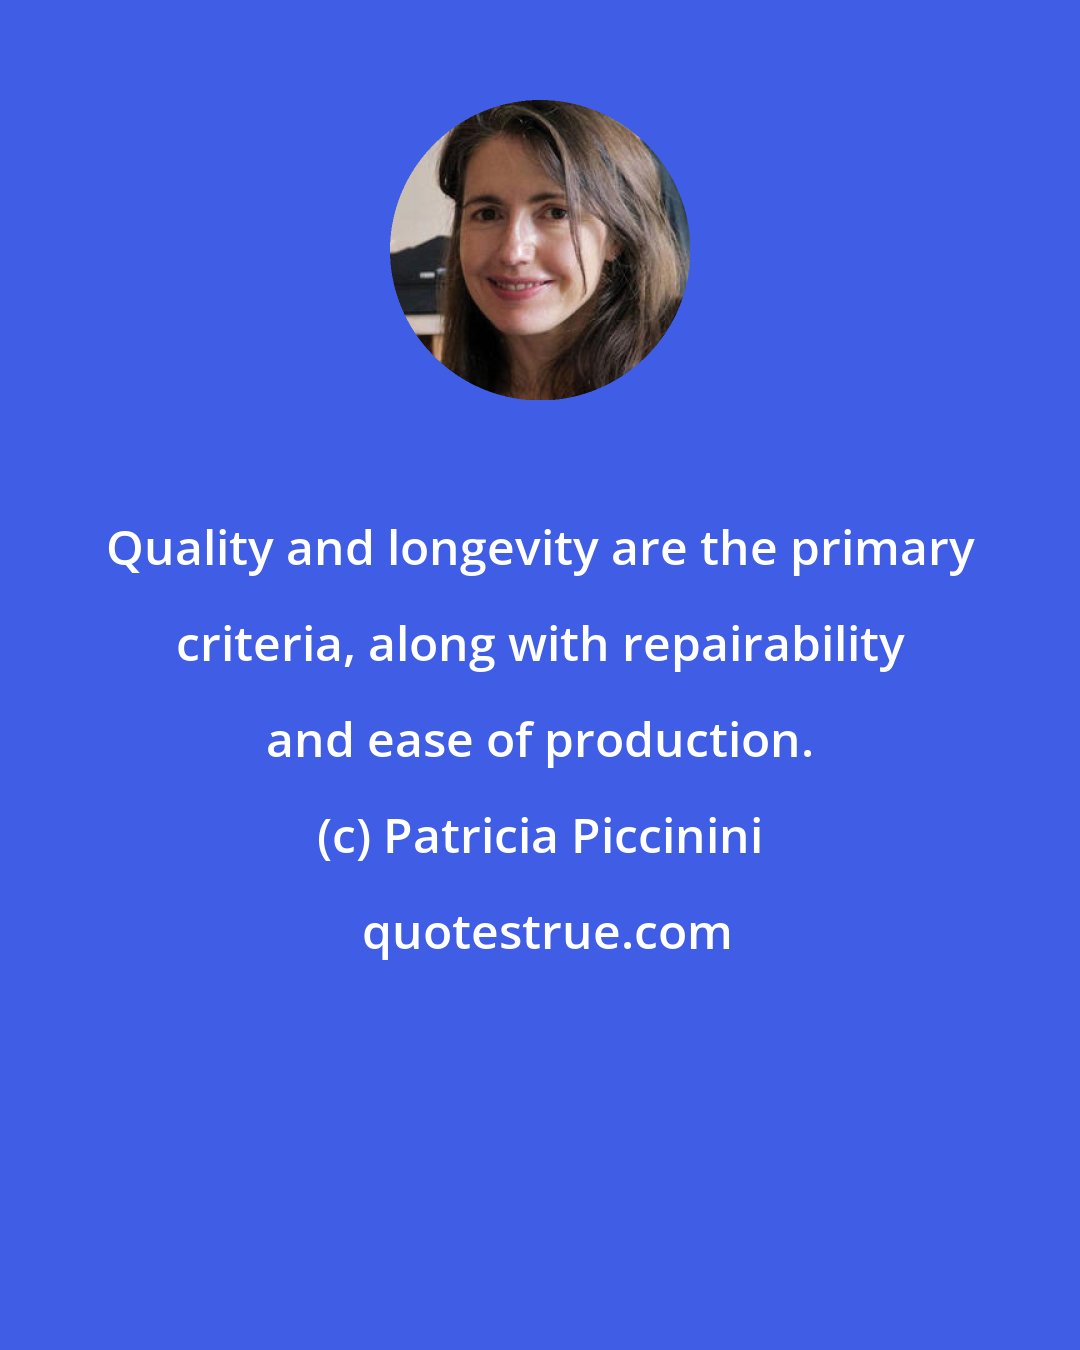 Patricia Piccinini: Quality and longevity are the primary criteria, along with repairability and ease of production.